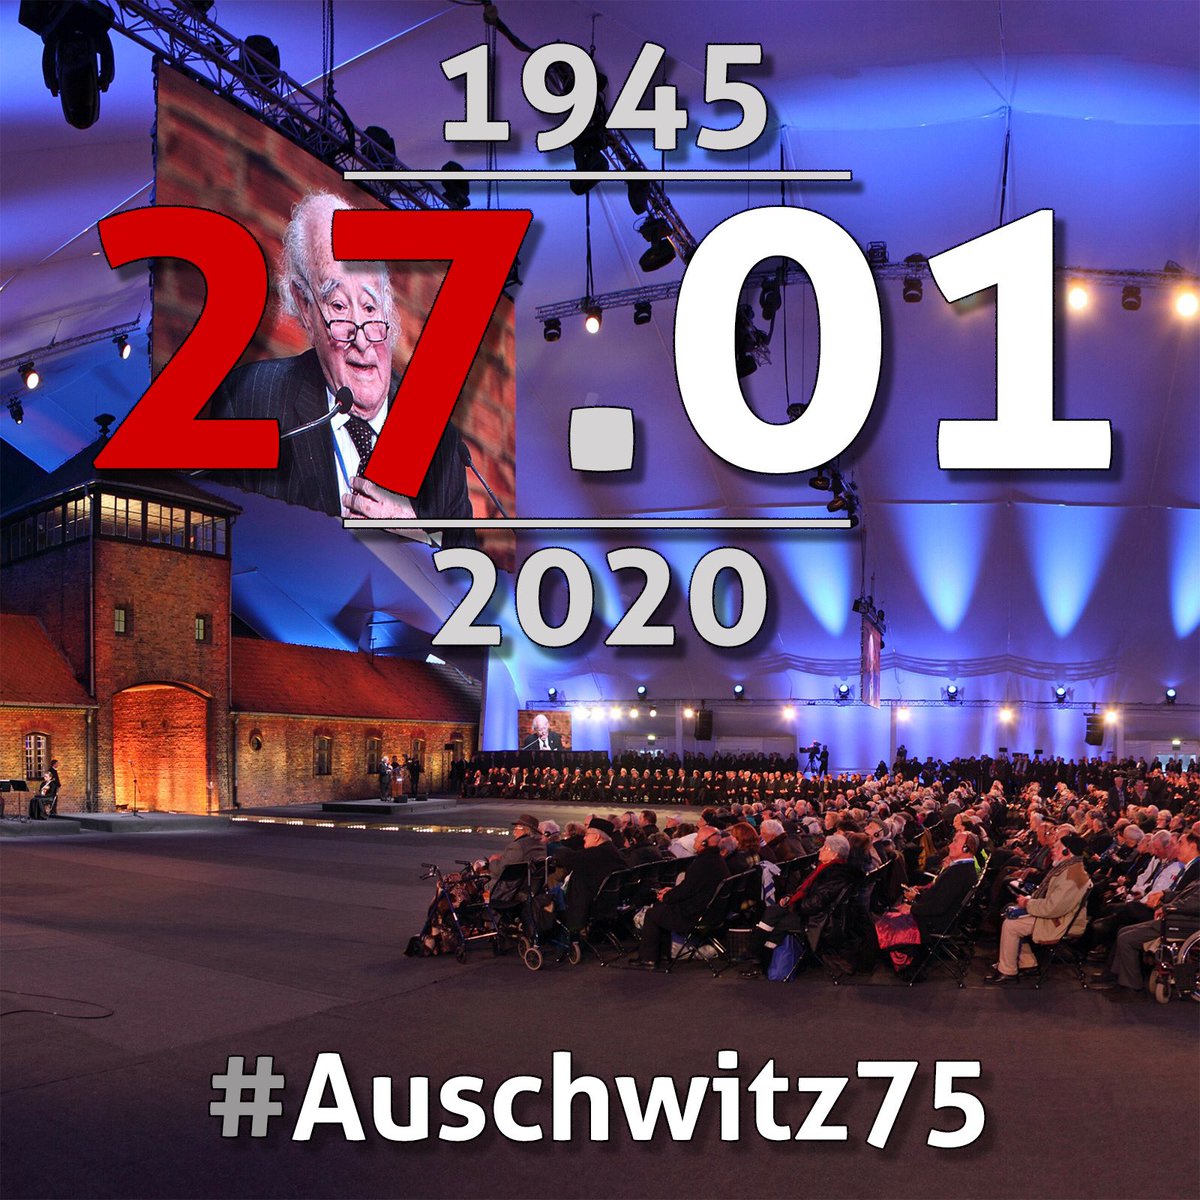 Help us preserve the memory of Auschwitz online. Symbolic goal: 750k followers for the 75th anniversary of the liberation #Auschwitz75 on 27 Jan 2020. We must not forget the tragic past to build a more responsible future. Please RT & encourage ppl to follow @AuschwitzMuseum.